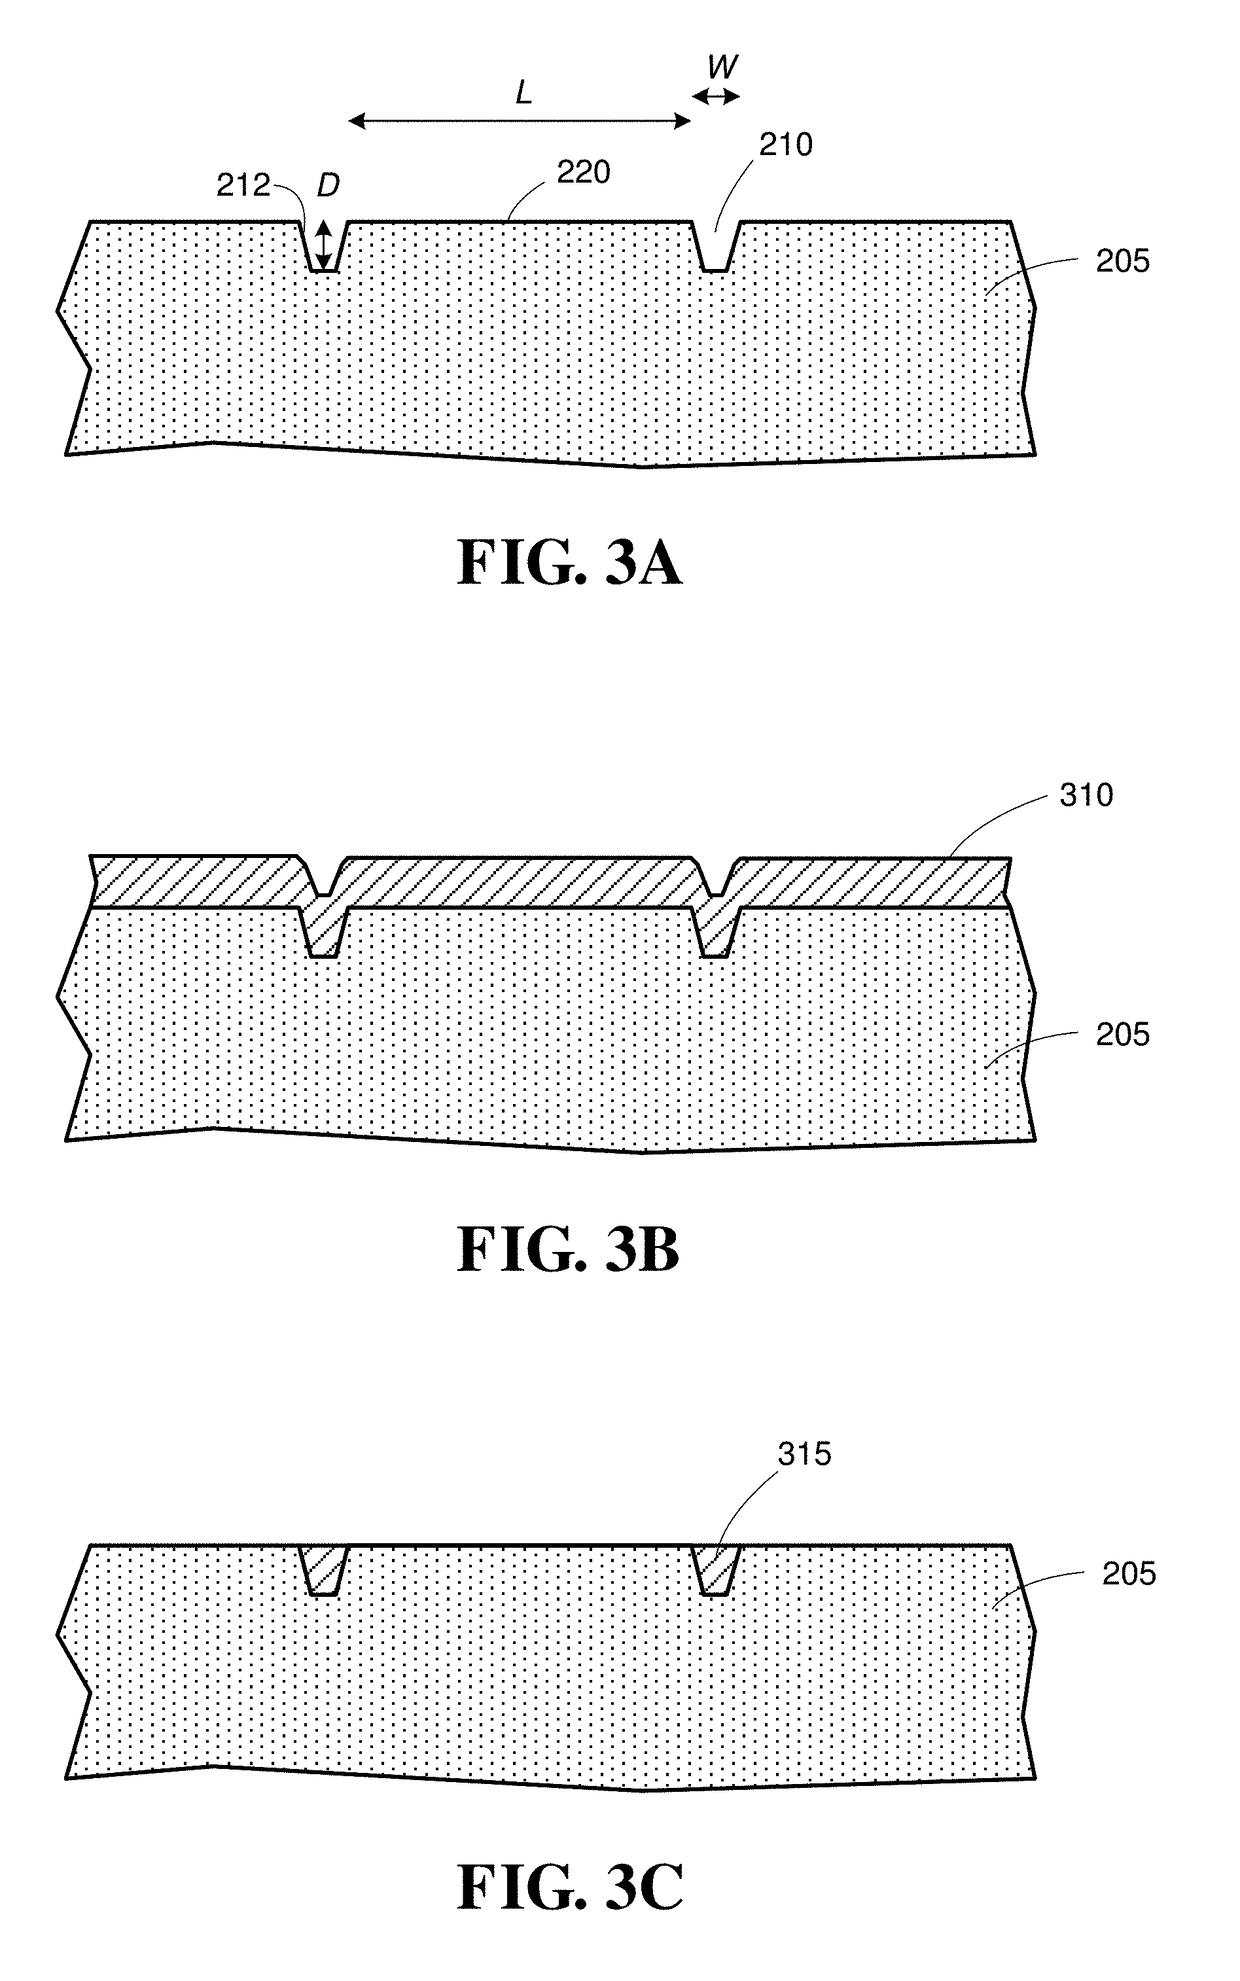 Reduction of wafer bow during growth of epitaxial films